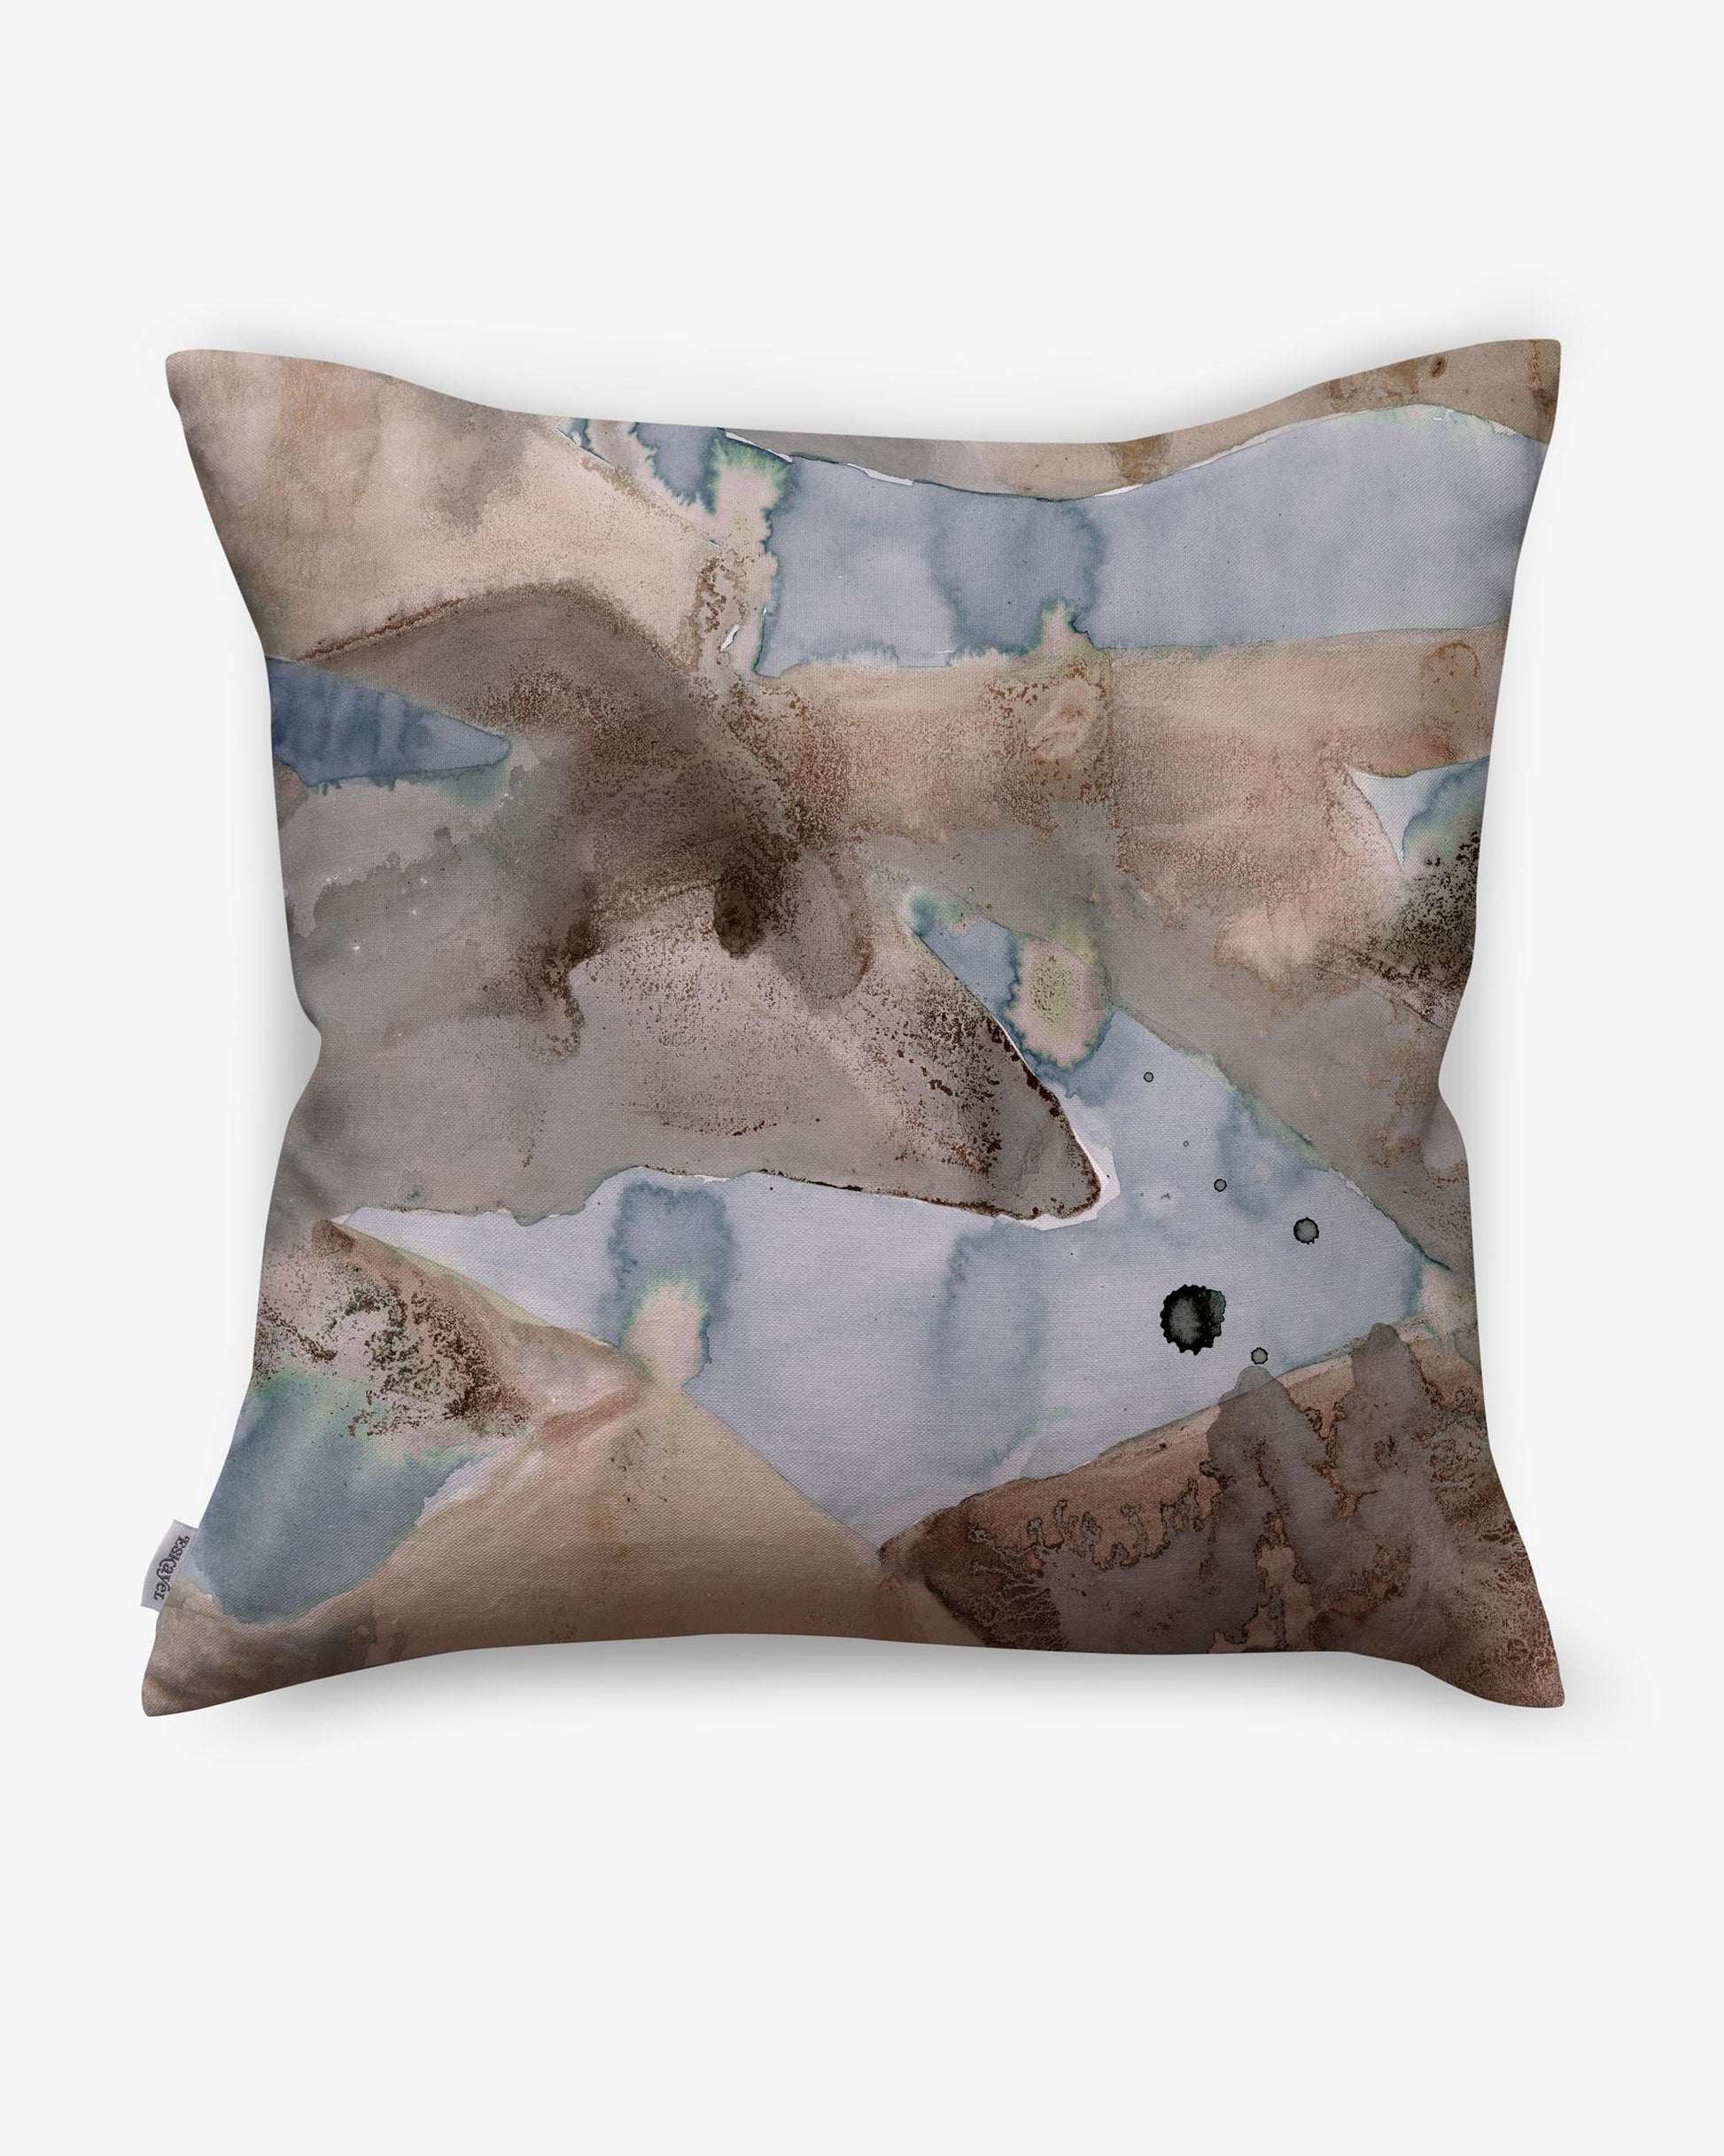 A luxury Mani Pillow with a watercolor painting by Isthmus.